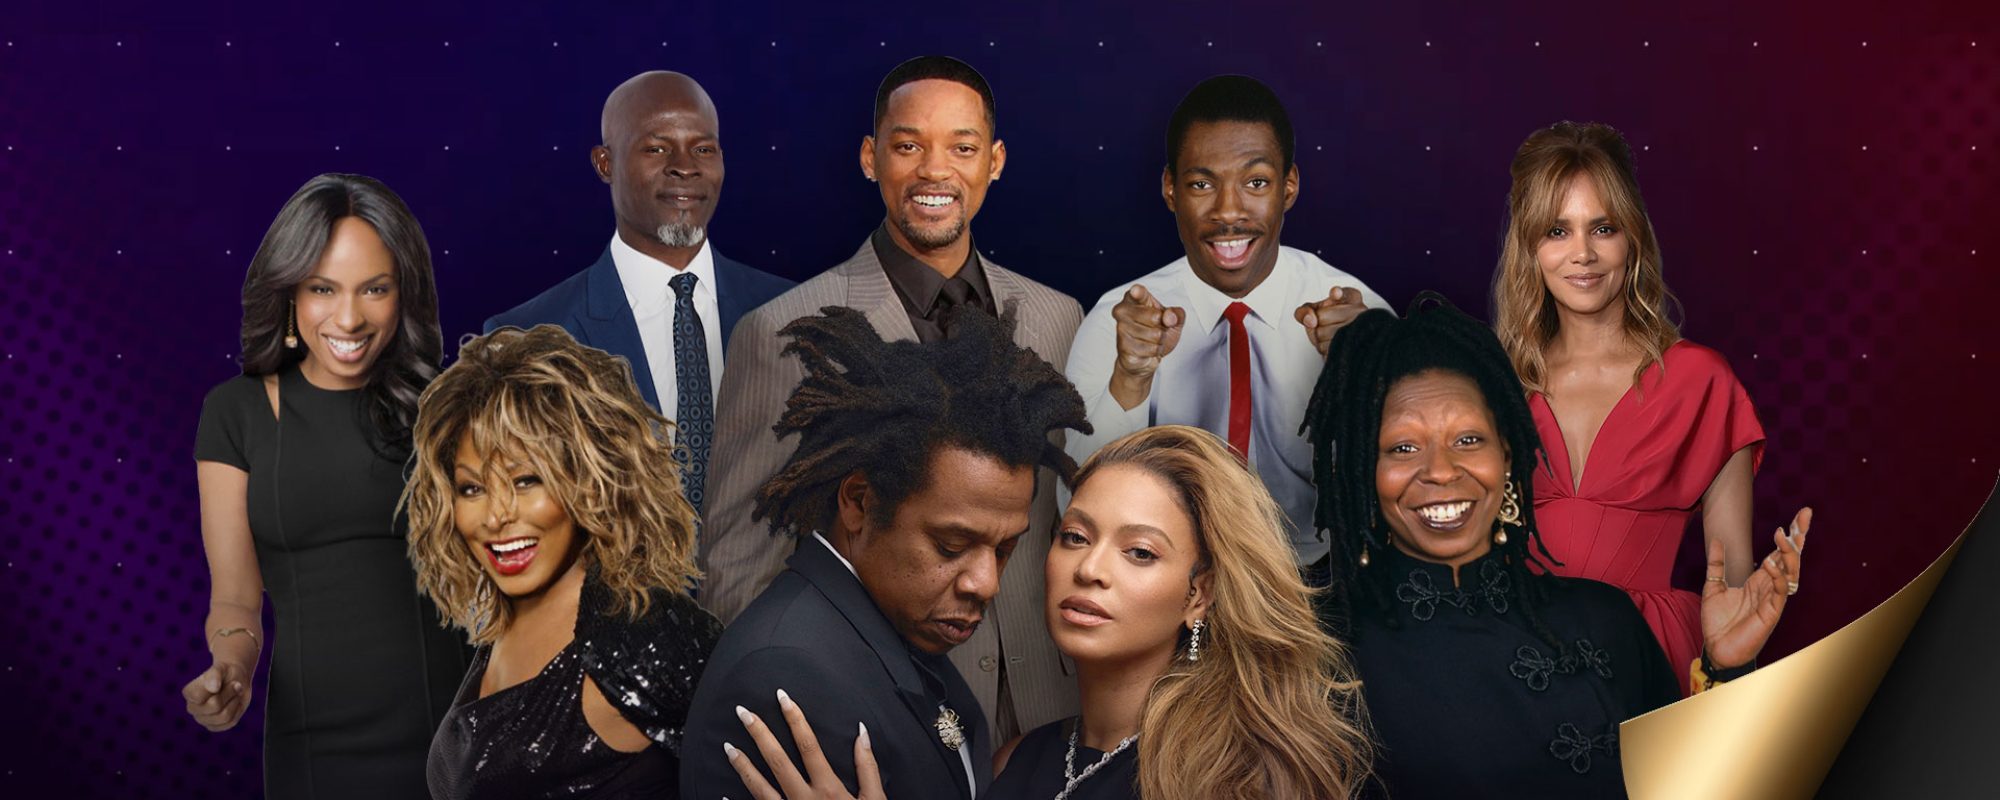 OVATION TV CELEBRATES BLACK HISTORY MONTH 2022 WITH WEEKLY “RED CARPET CINEMA” CELEBRATIONS, PUBLIC SERVICE ANNOUNCEMENTS, AND A CURATED ON-DEMAND PROGRAMMING LINEUP